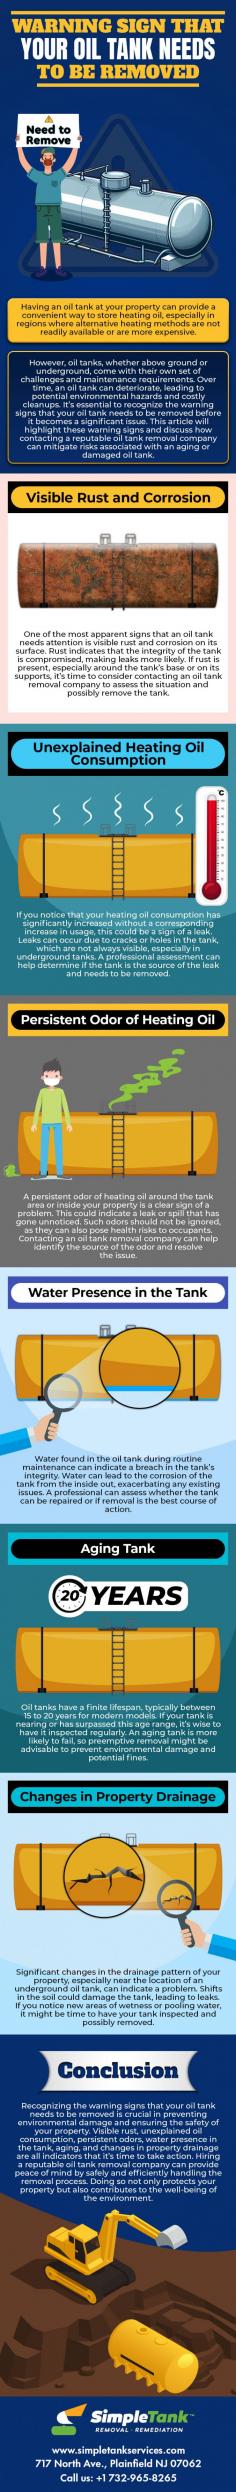 Looking for the signs to remove your oil tank? At Simple Tank Services, we understand the importance of detecting potential issues early. Watch out for rust, leaks, odors, and unusually high oil consumption. If you notice any of these signs, contact us today for expert removal services.